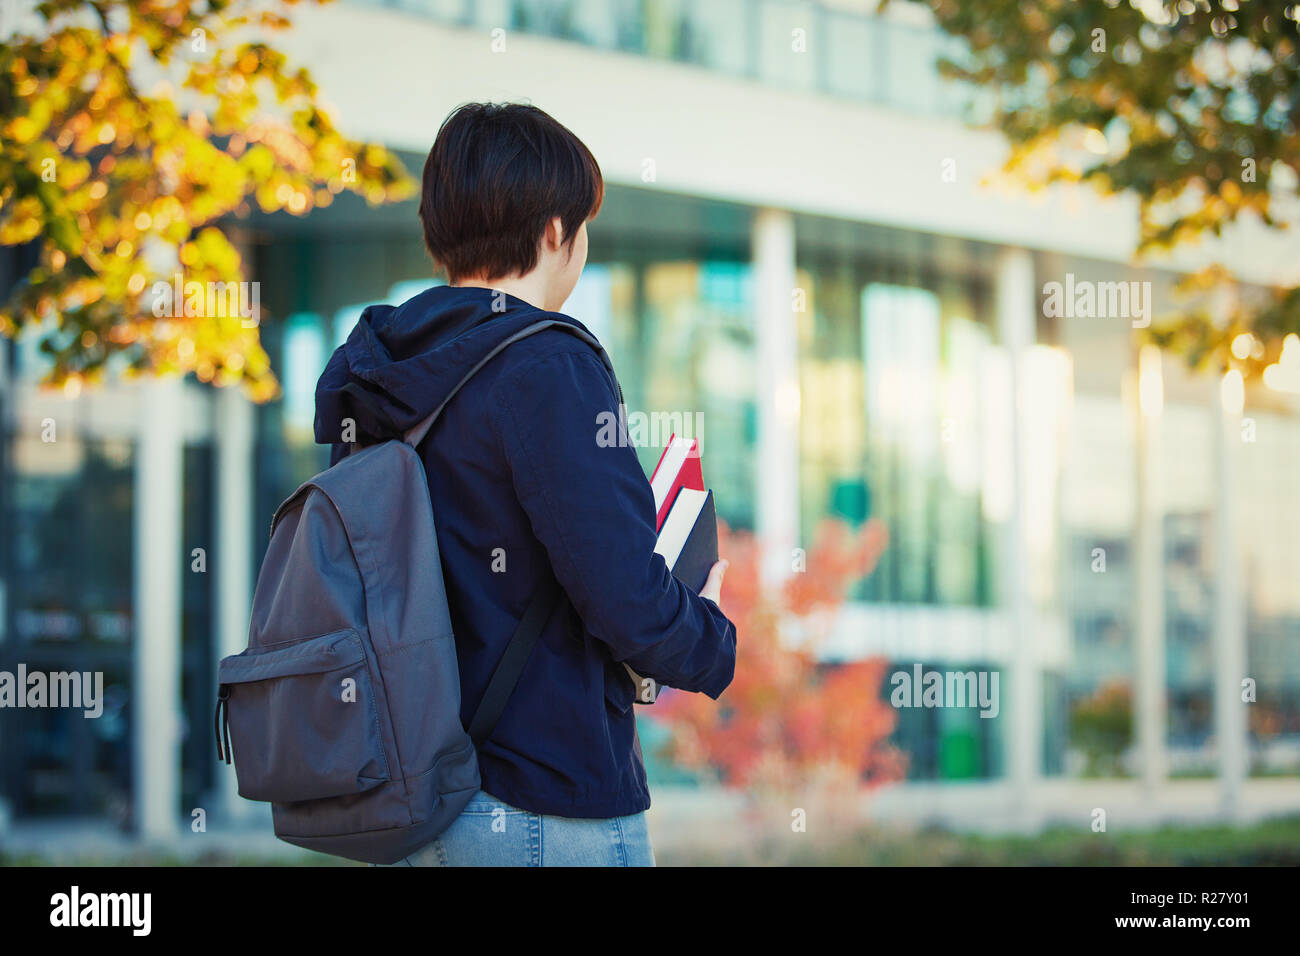 Rear view student girl portrait carrying backpack and books. Autumn lifestyle concept. Stock Photo